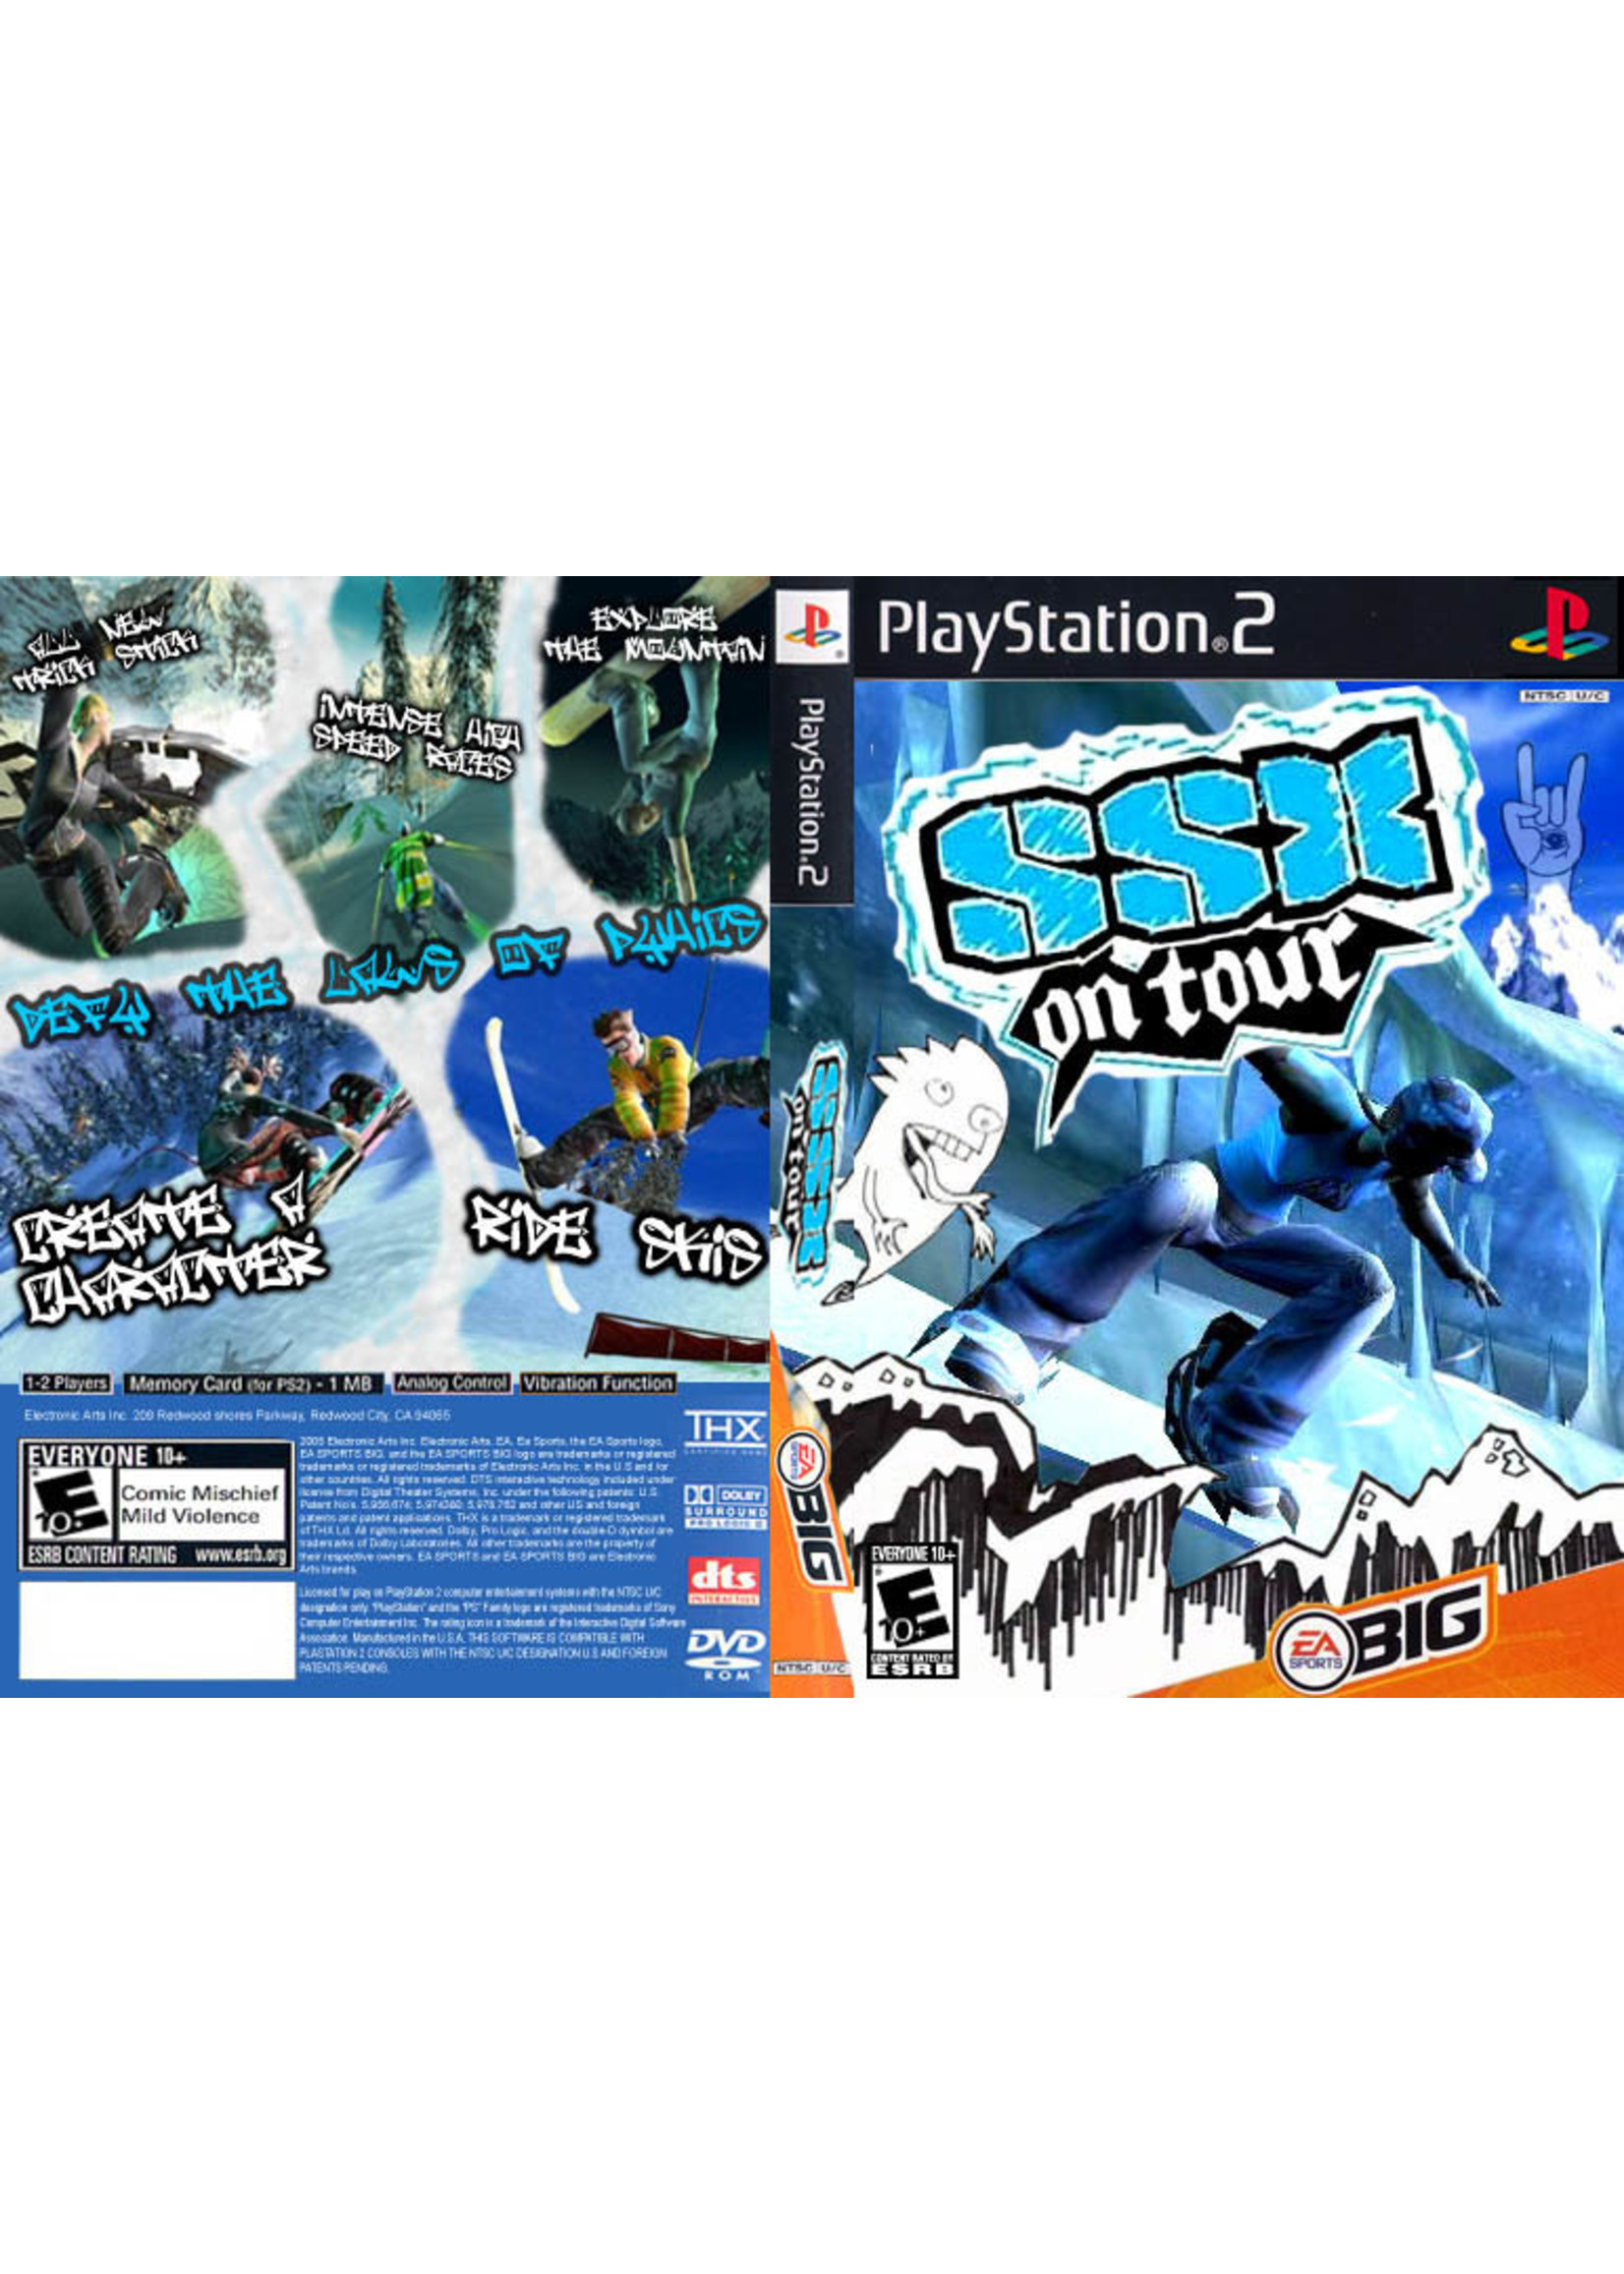 Sony Playstation 2 (PS2) SSX On Tour